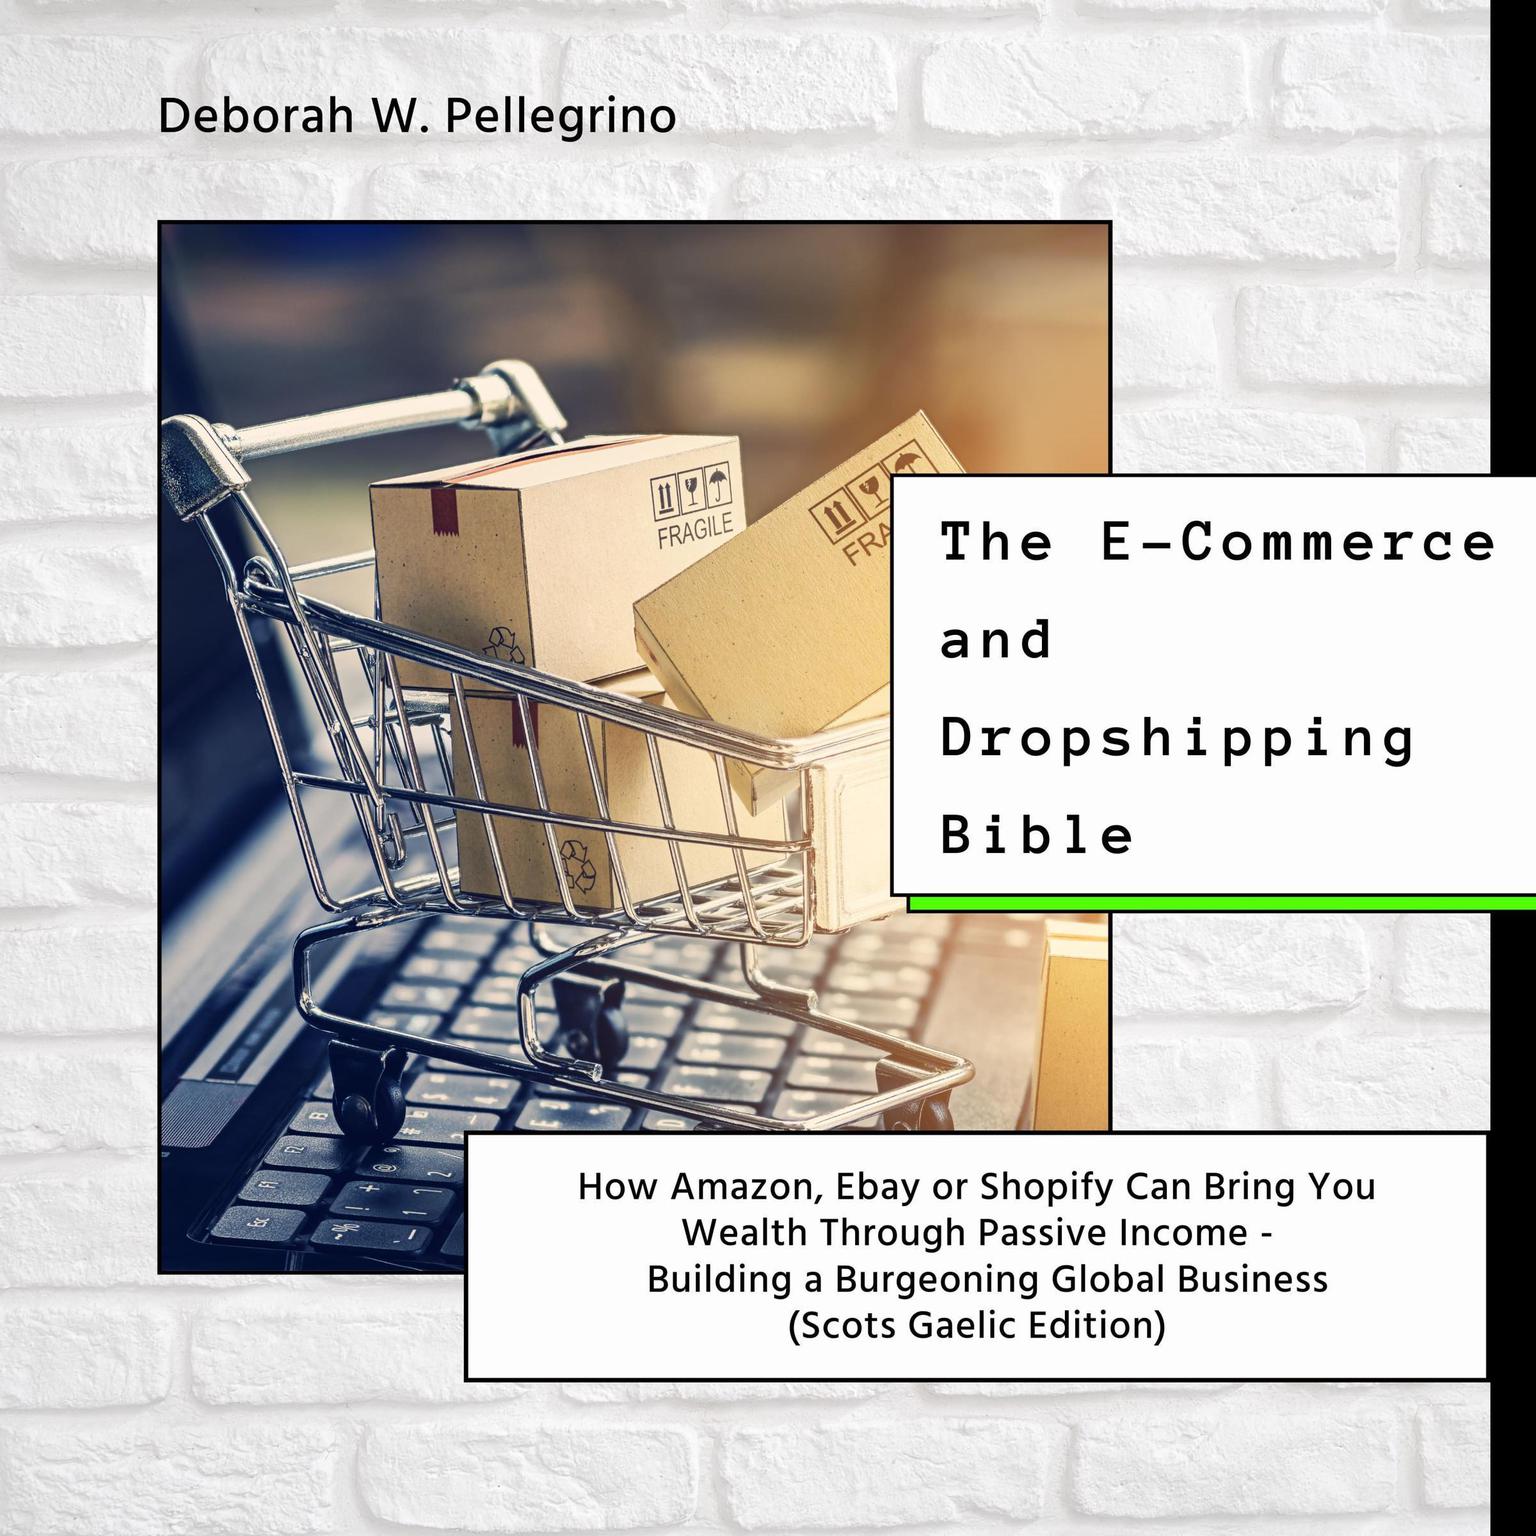 The E-Commerce and Dropshipping Bible: How Amazon, Ebay or Shopify Can Bring You Wealth Through Passive Income - Building a Burgeoning Global Business (Scots Gaelic Edition) Audiobook, by Deborah W Pellegrino